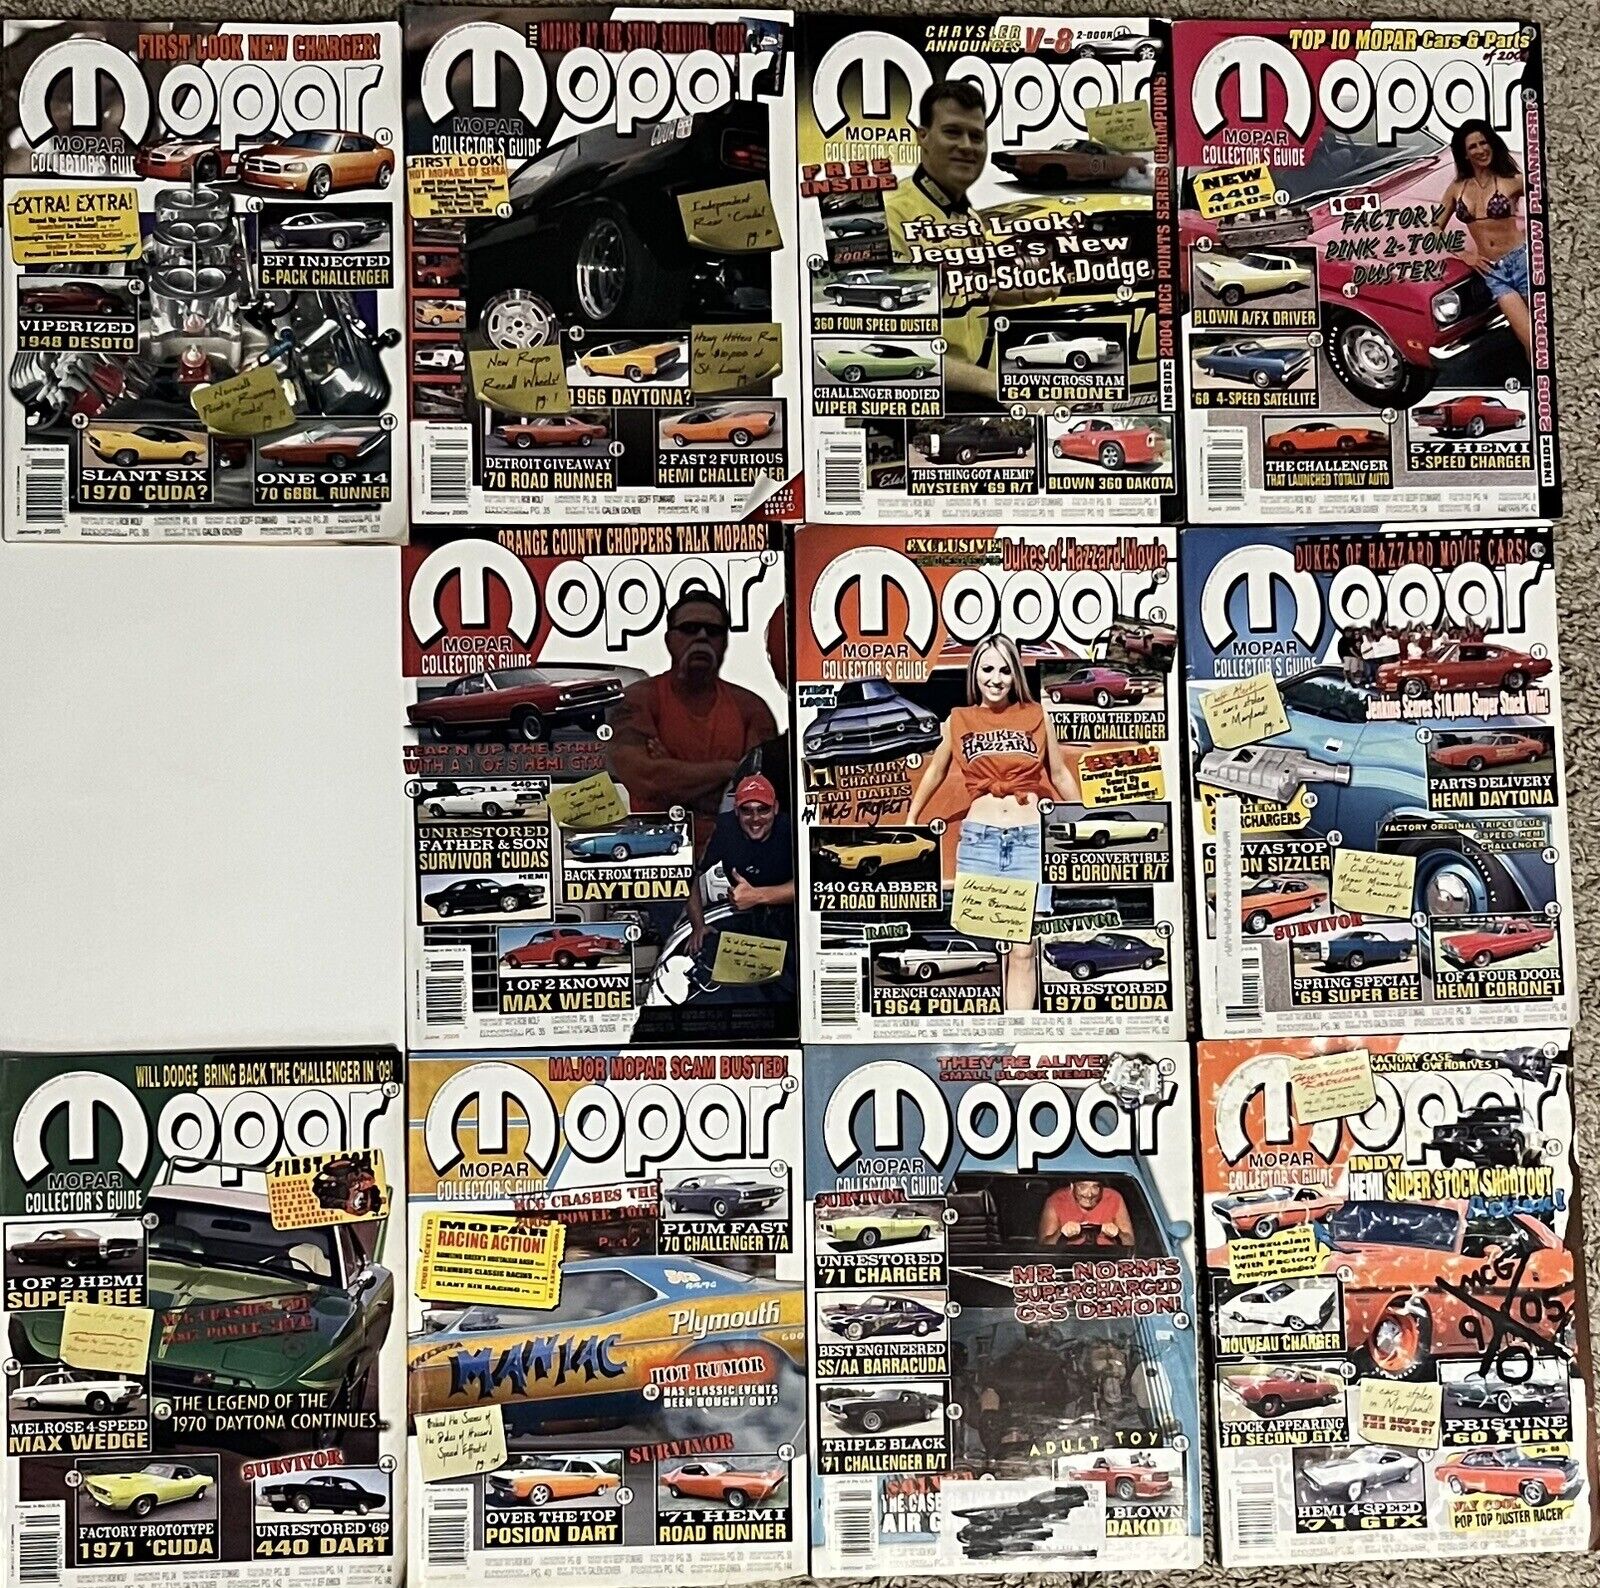 MOPAR Collector’s Guide - 2005 - Lot Of 11 Issues - Incomplete Year - No May